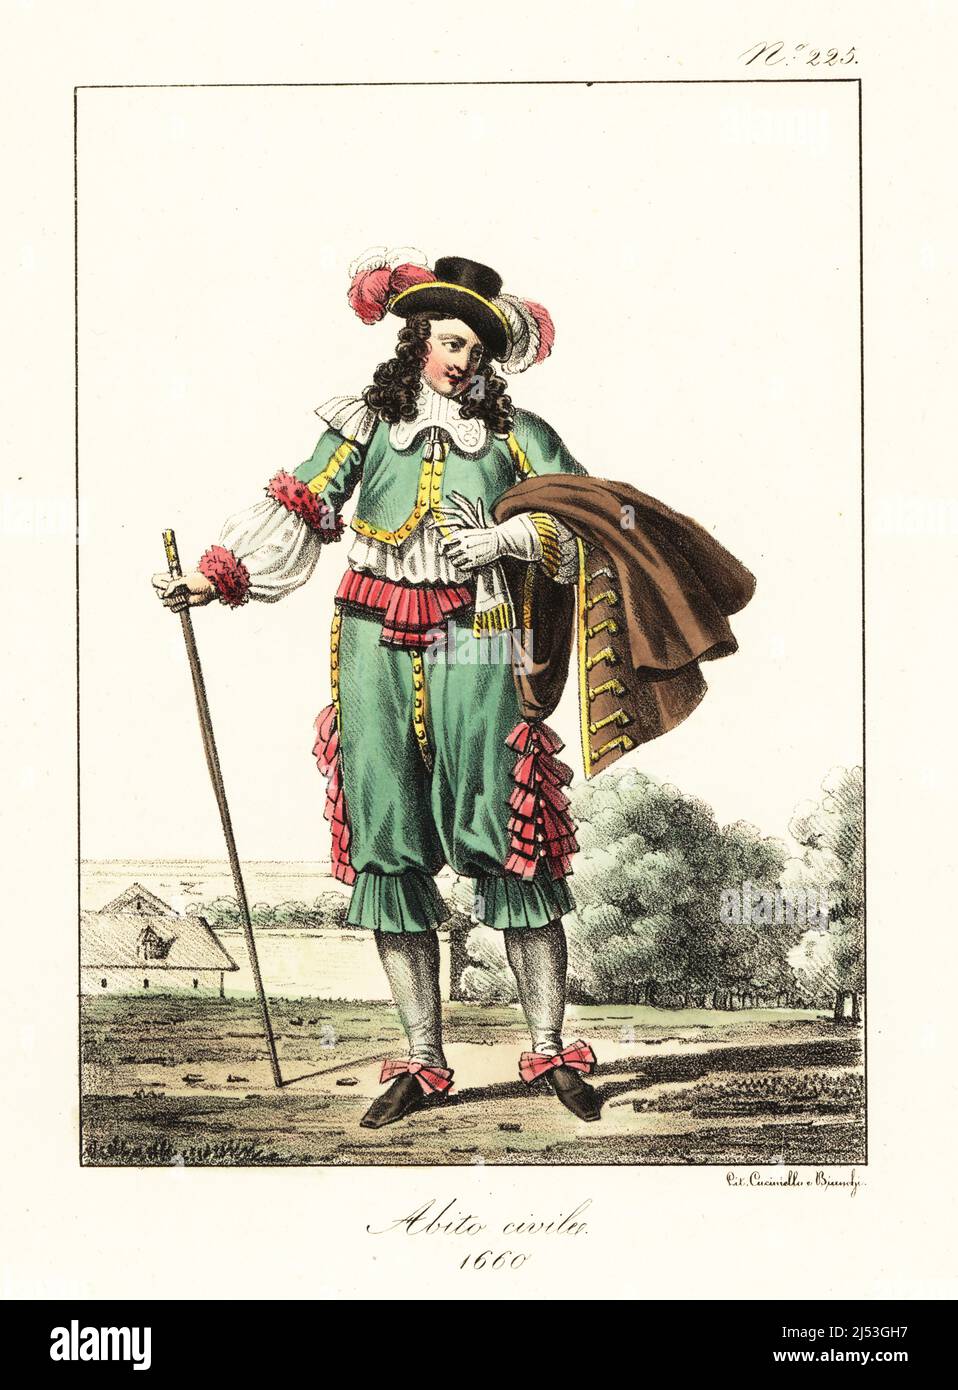 Costume of a French gentleman, 1660. In plumed hat, coat with frogging,  short jacket, shirt, pantalons with ribbons, hose, ribbon shoes, holding a  cane and glove. Costume Civil 1660. Handcoloured lithograph by